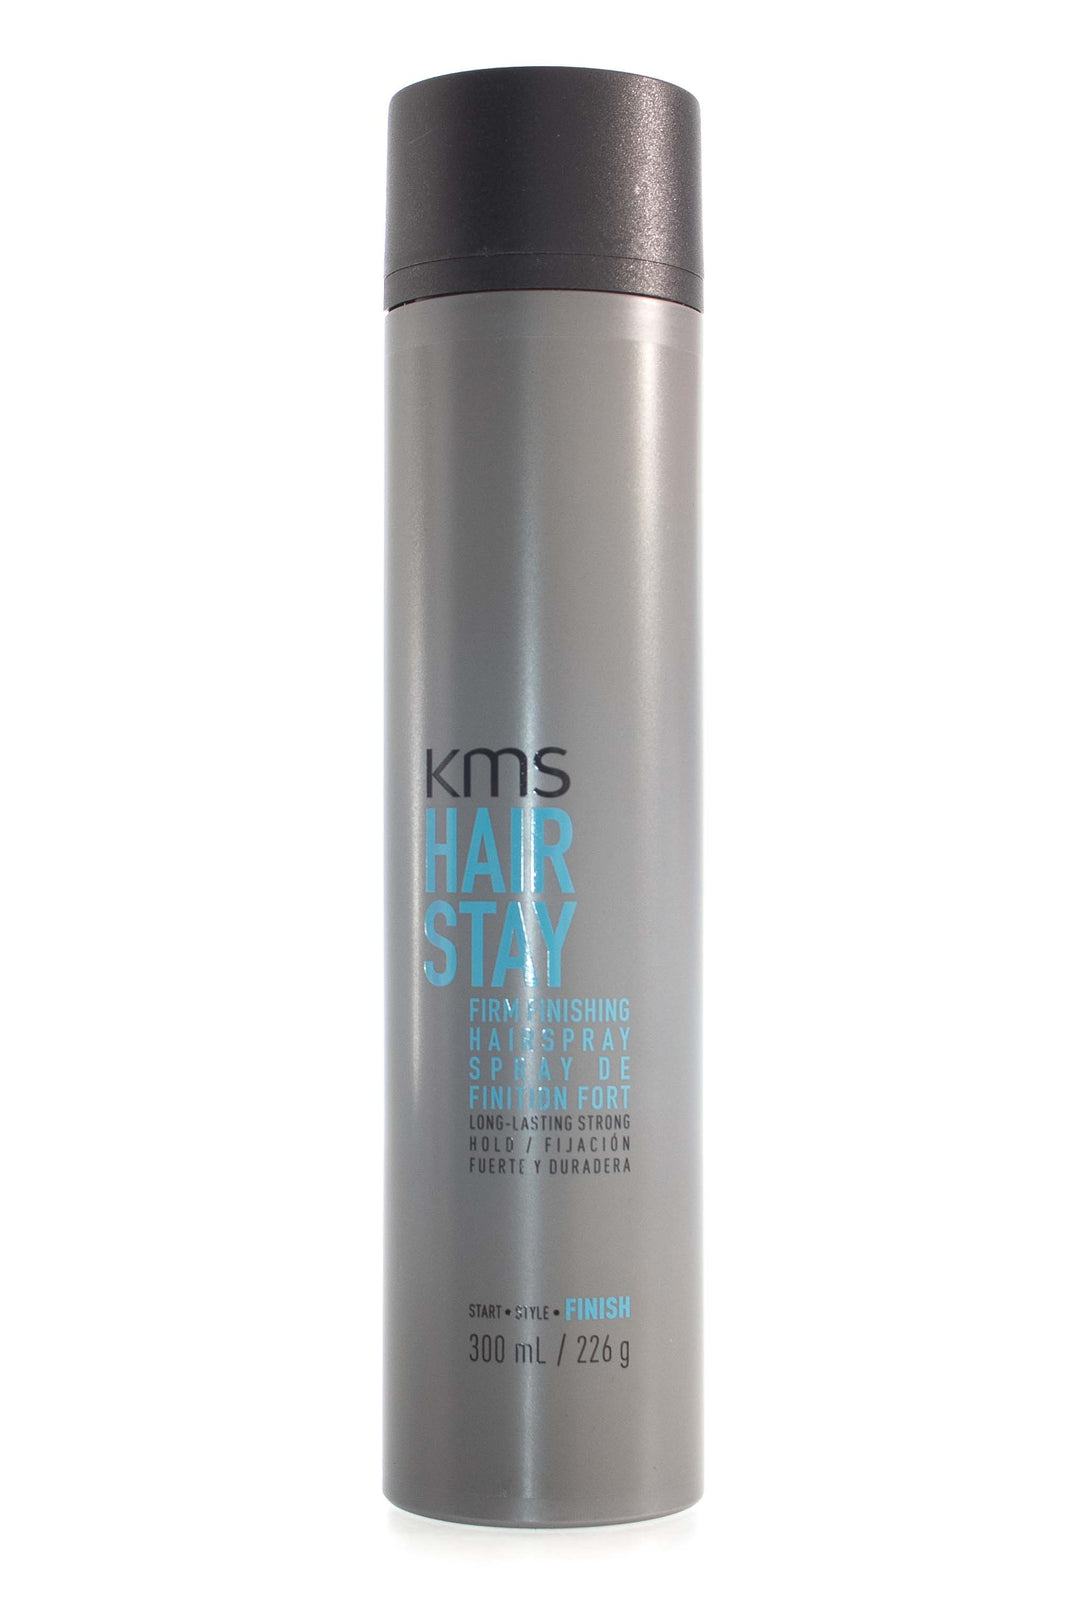 kms-hairstay-firm-finishing-spray-300ml